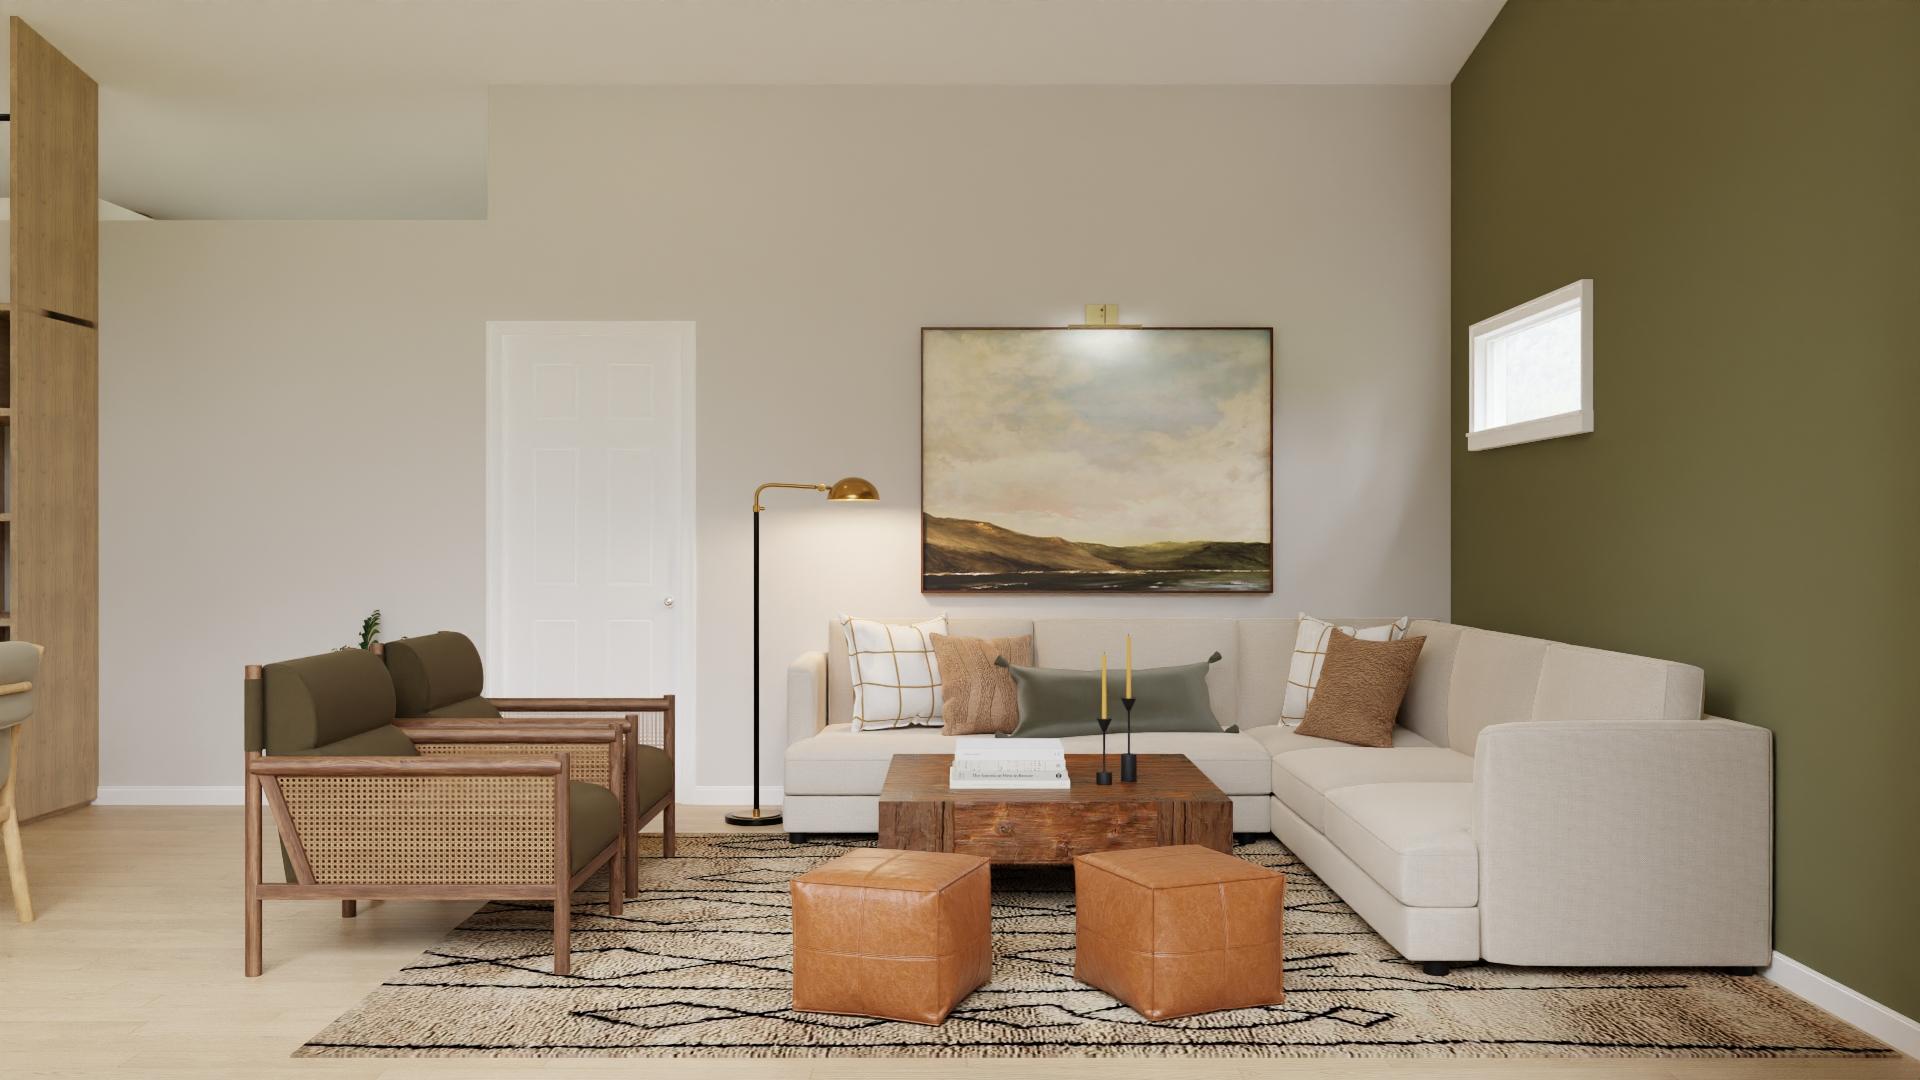 Transitional Living Room with Earthy Hues